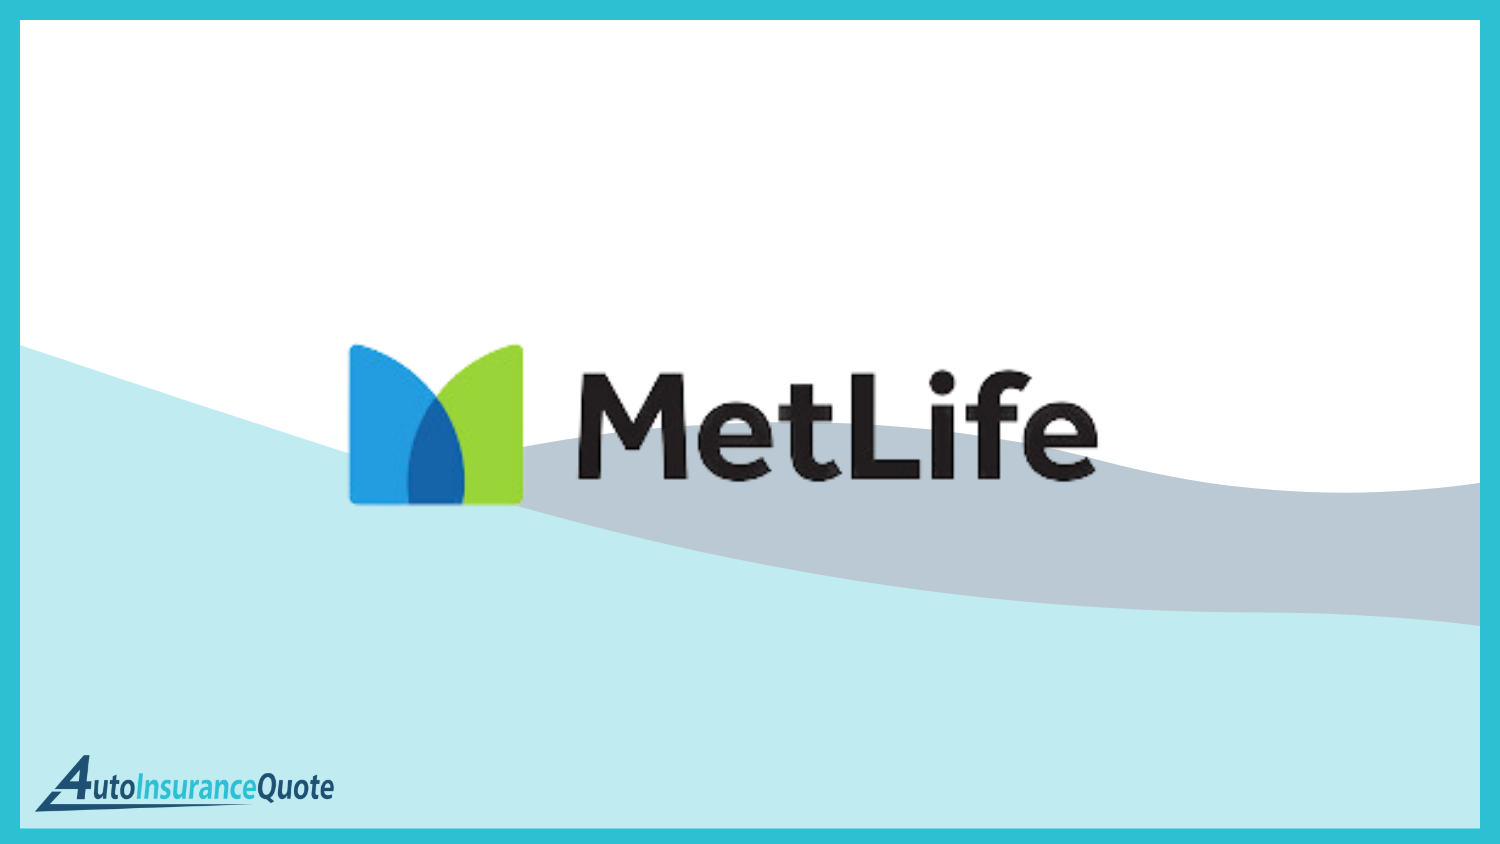 metlife Best Auto Insurance Companies That Do Not Monitor Your Driving